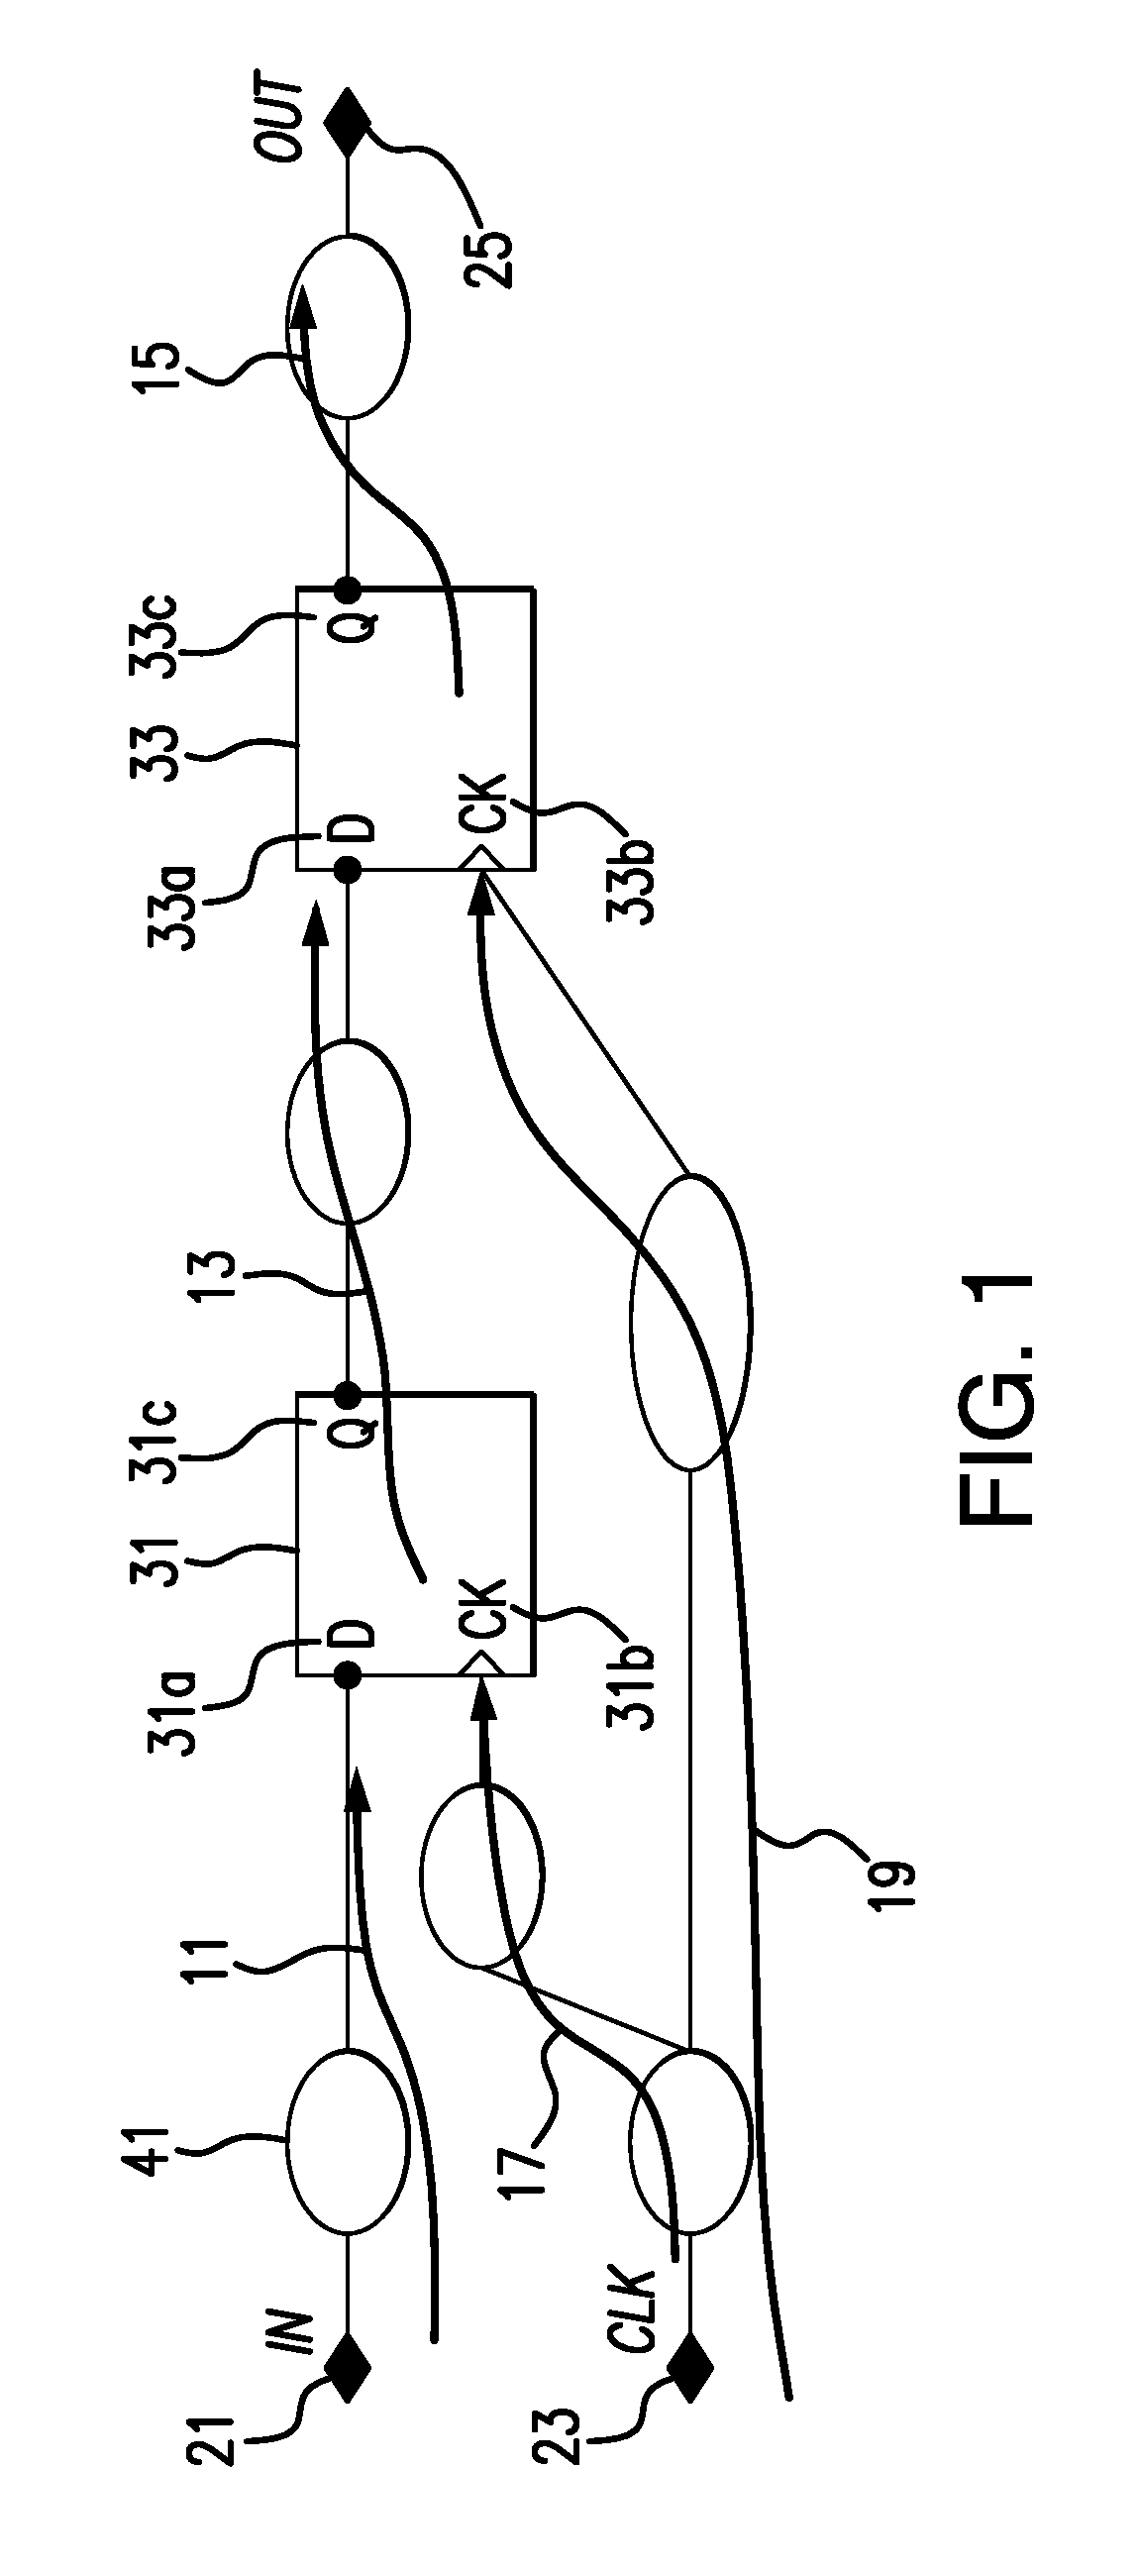 Method and apparatus for efficient generation of compact waveform-based timing models